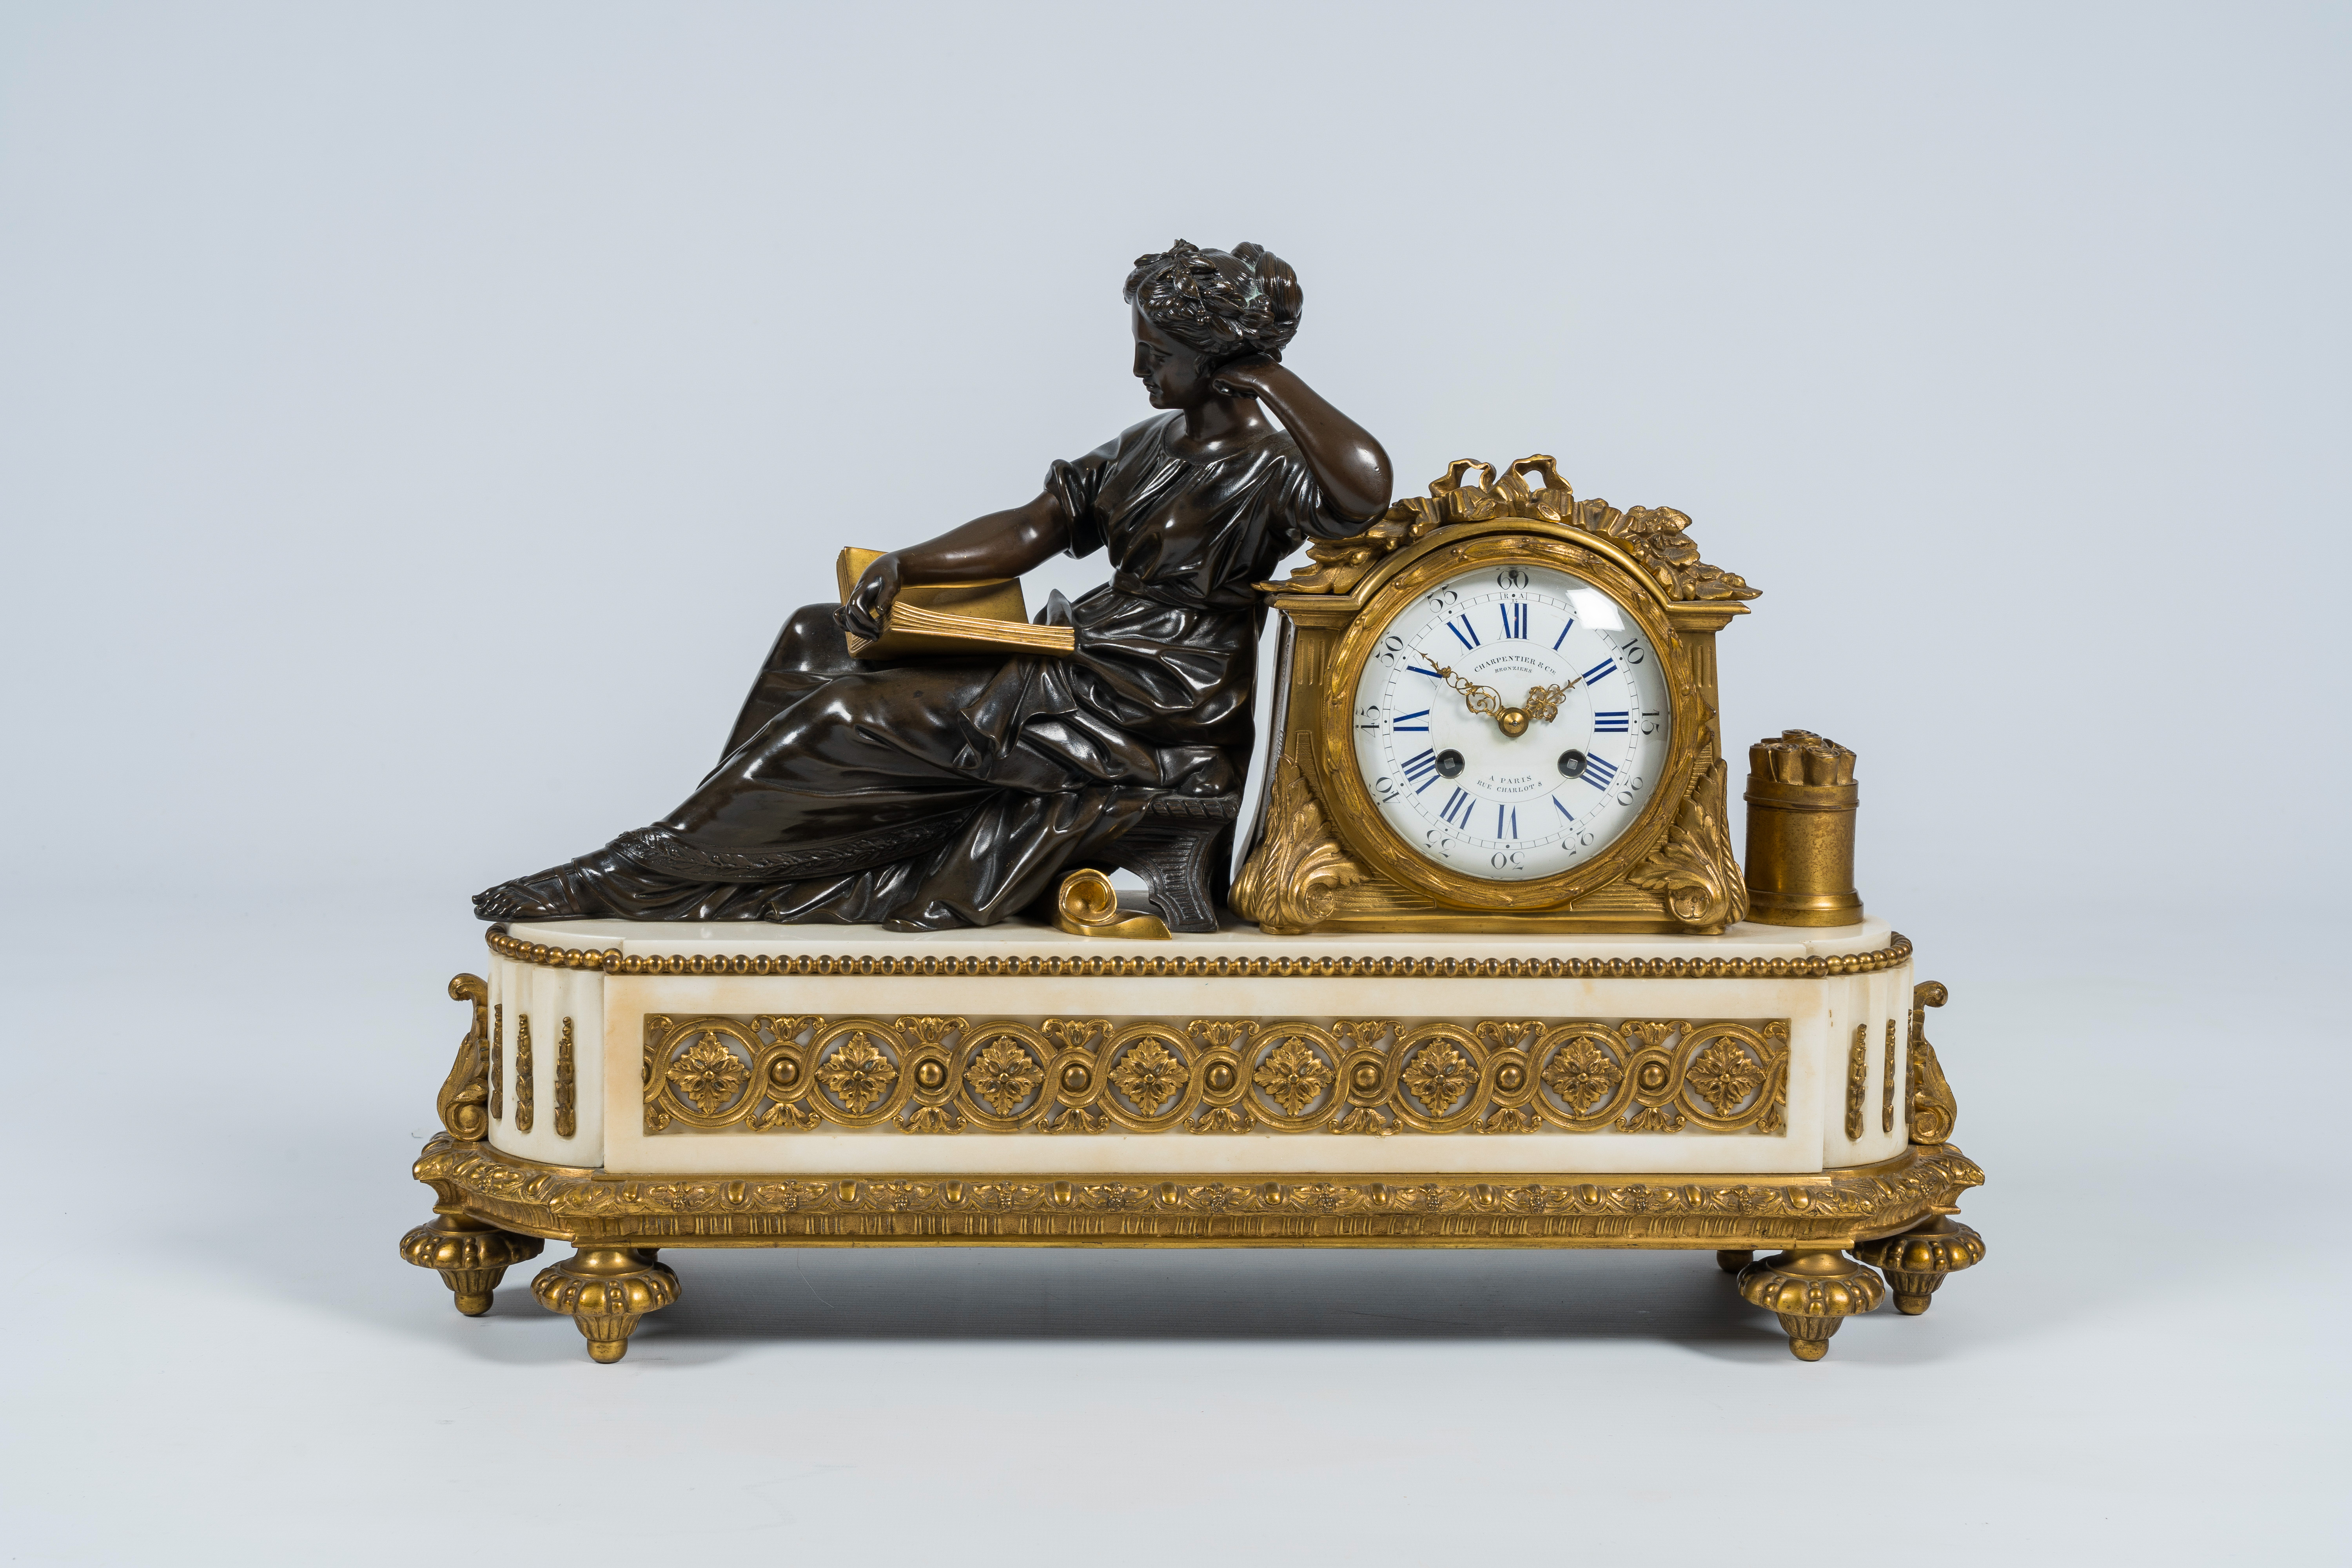 A French gilt bronze mounted white marble mantel clock with a reading lady, Charpentier & Cie, 19th